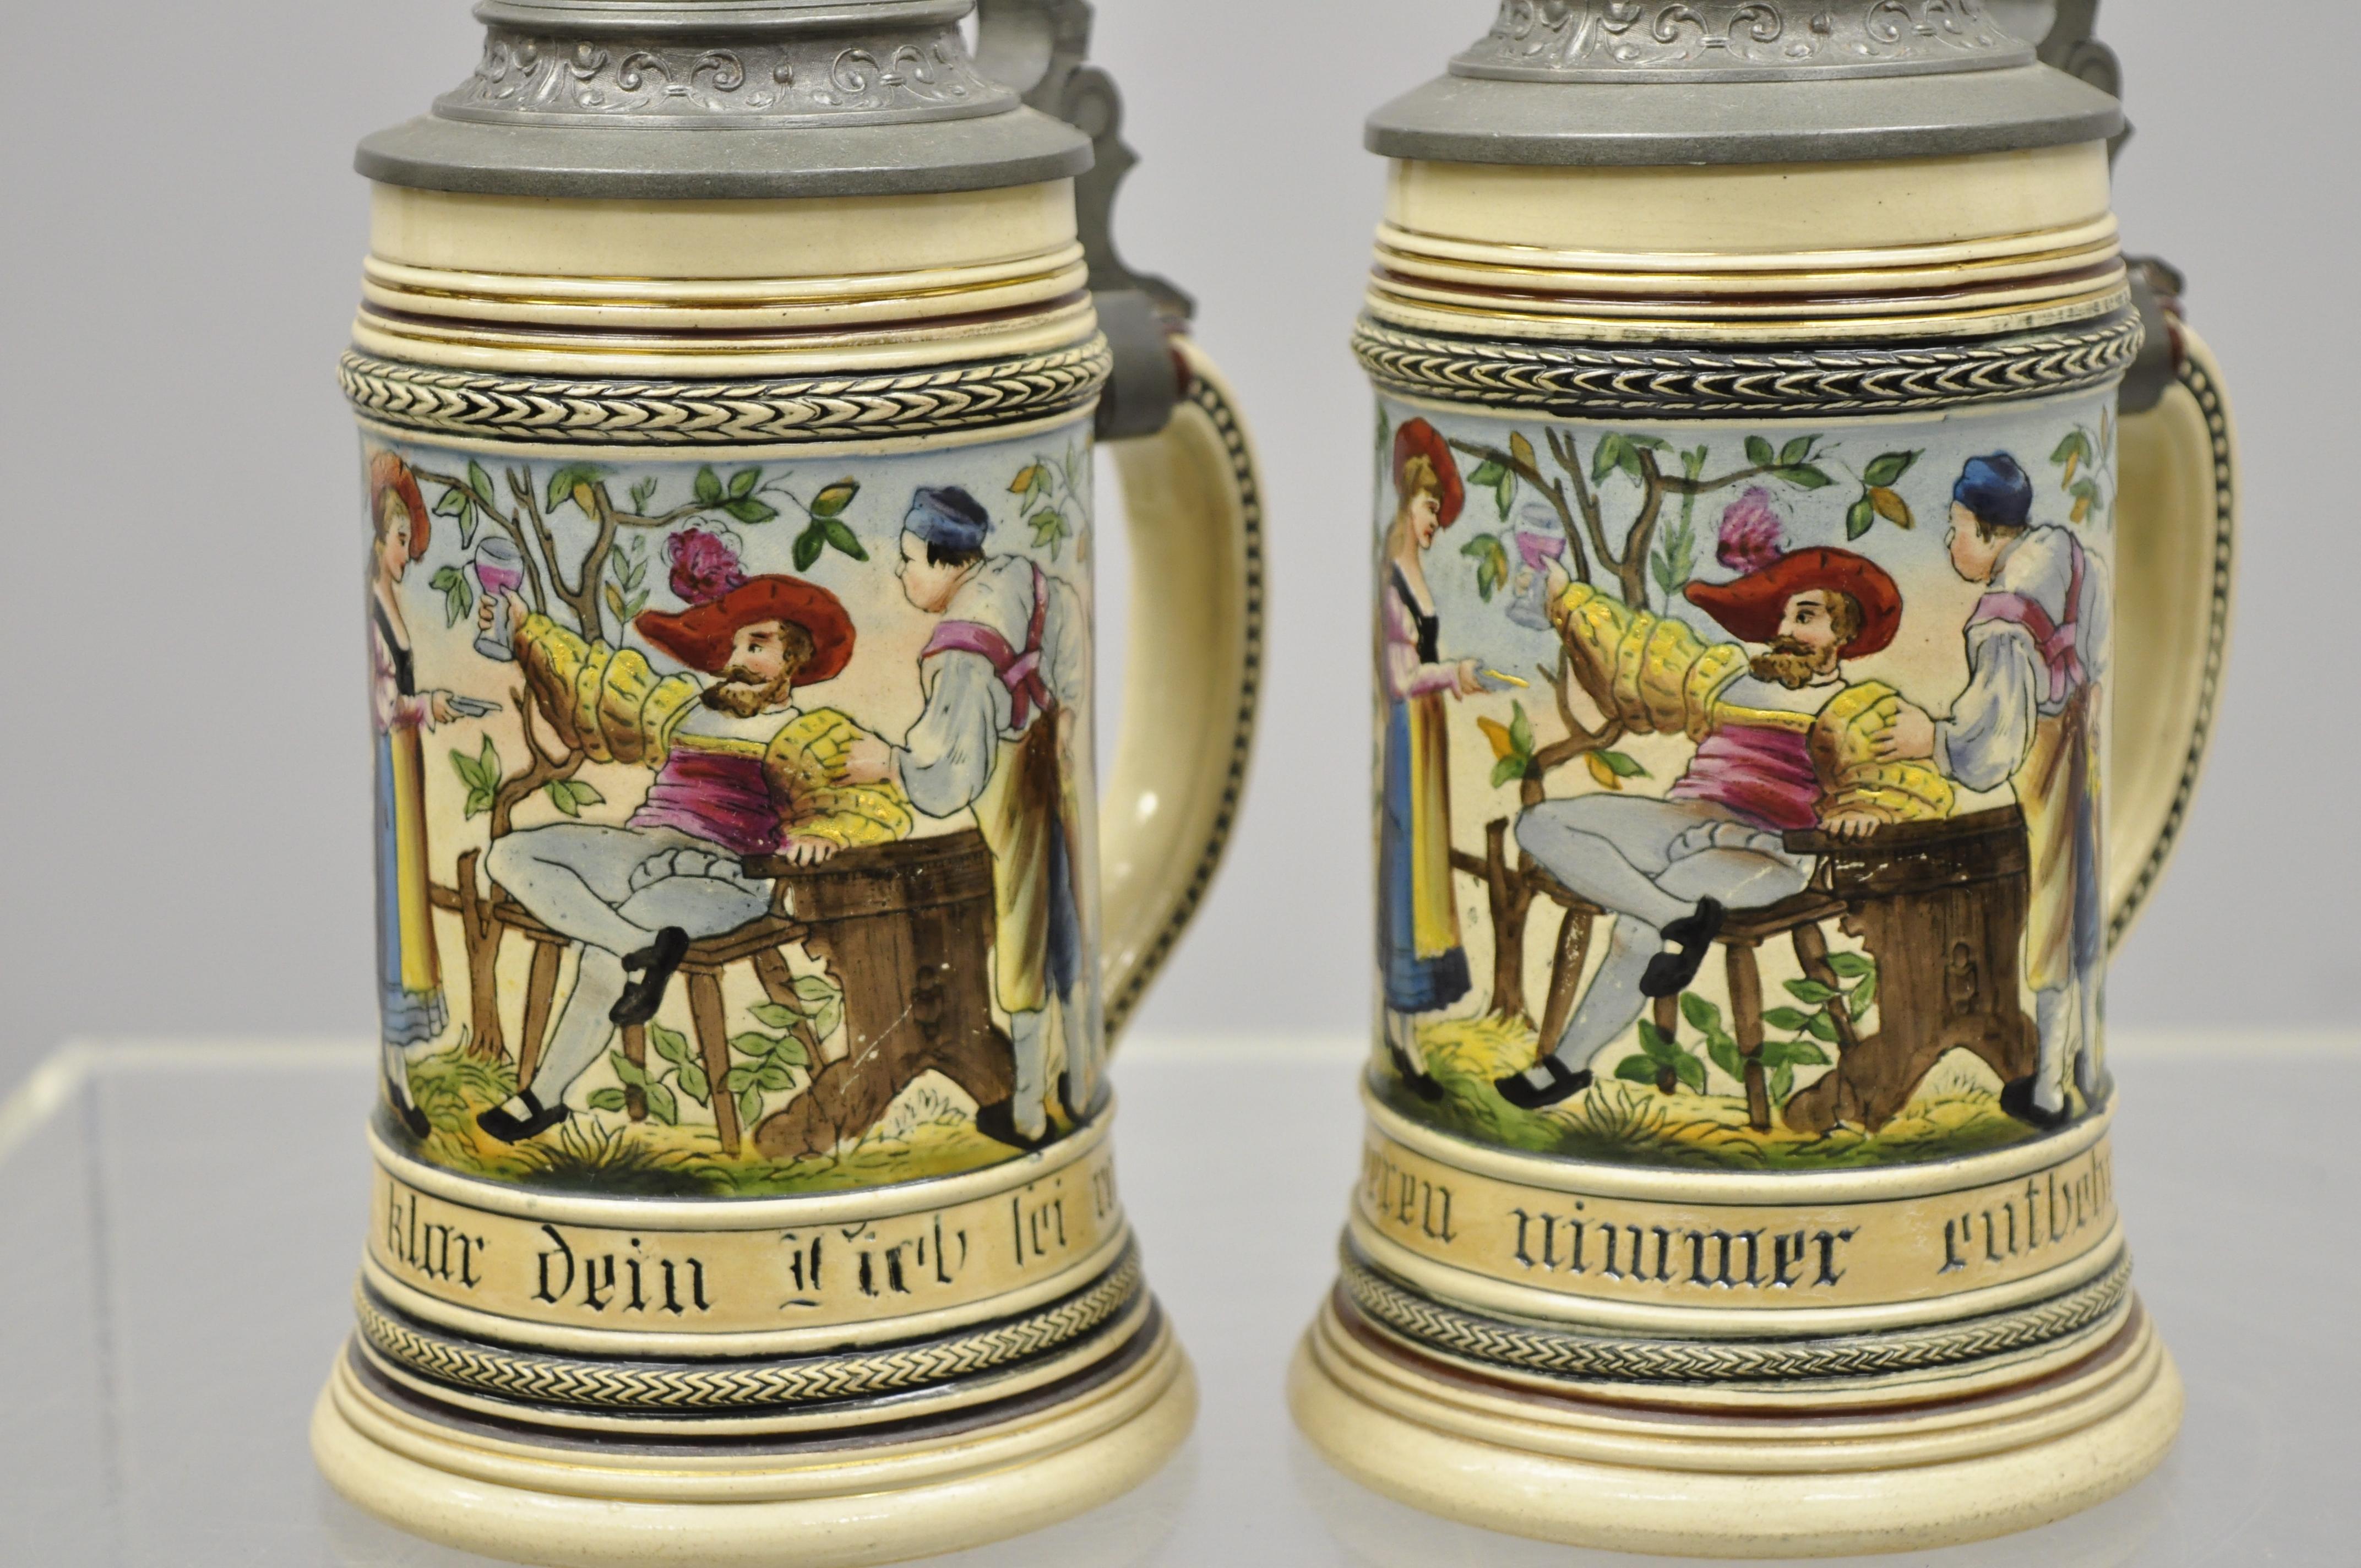 Renaissance Antique German Lidded Beer Stein 7-Piece Set by Marzi and Remy #979 Cavalier